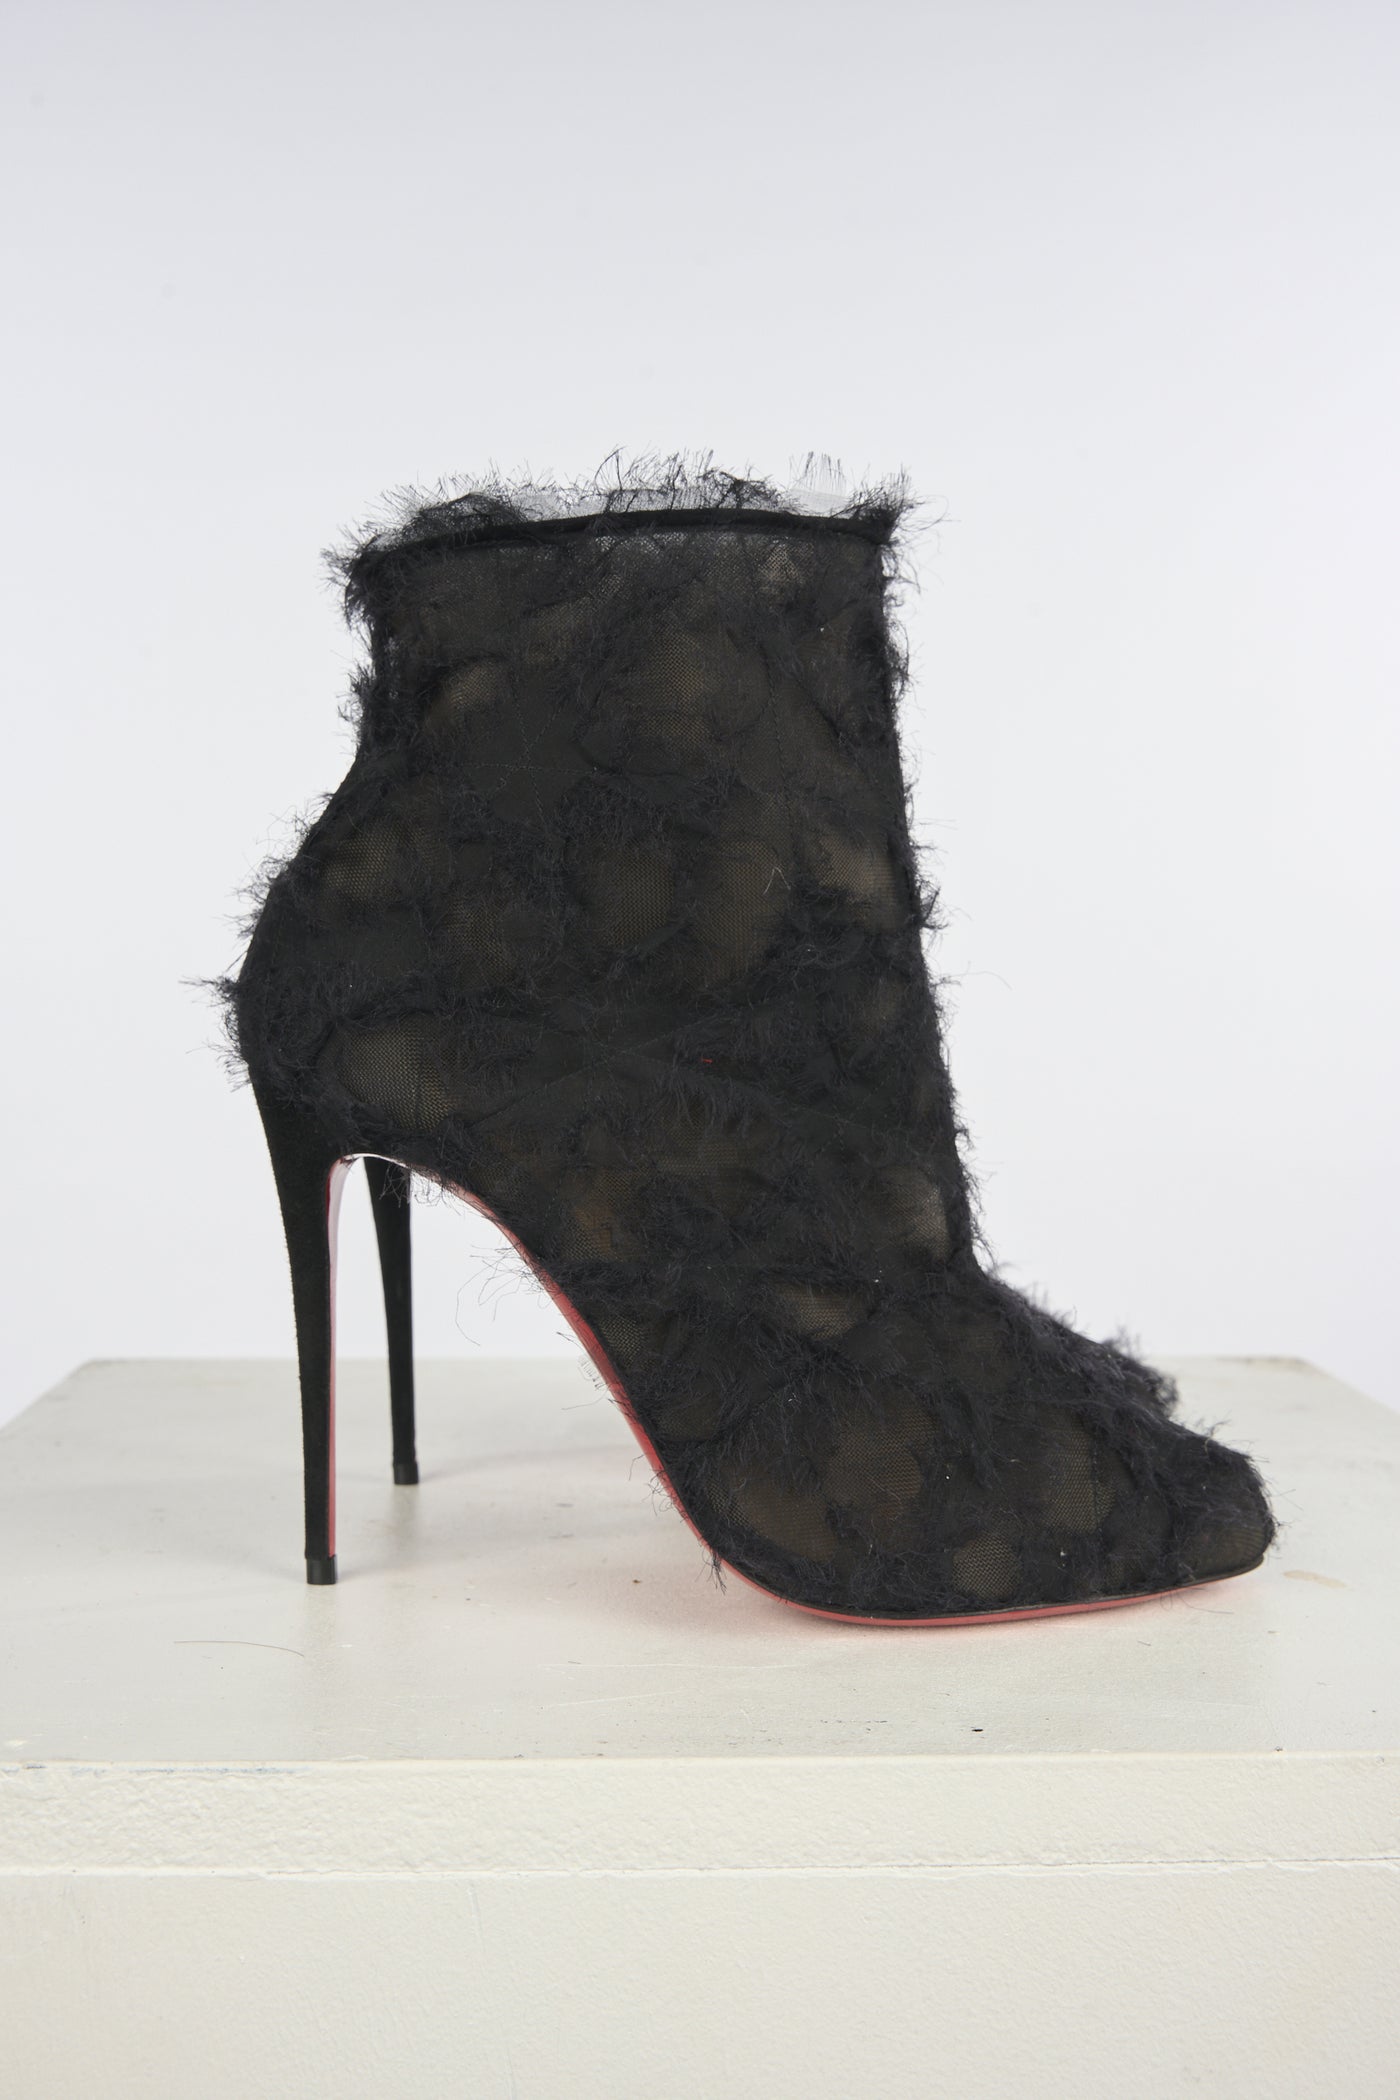 Christian LOUBOUTIN mesh see through boots size 39 never worn